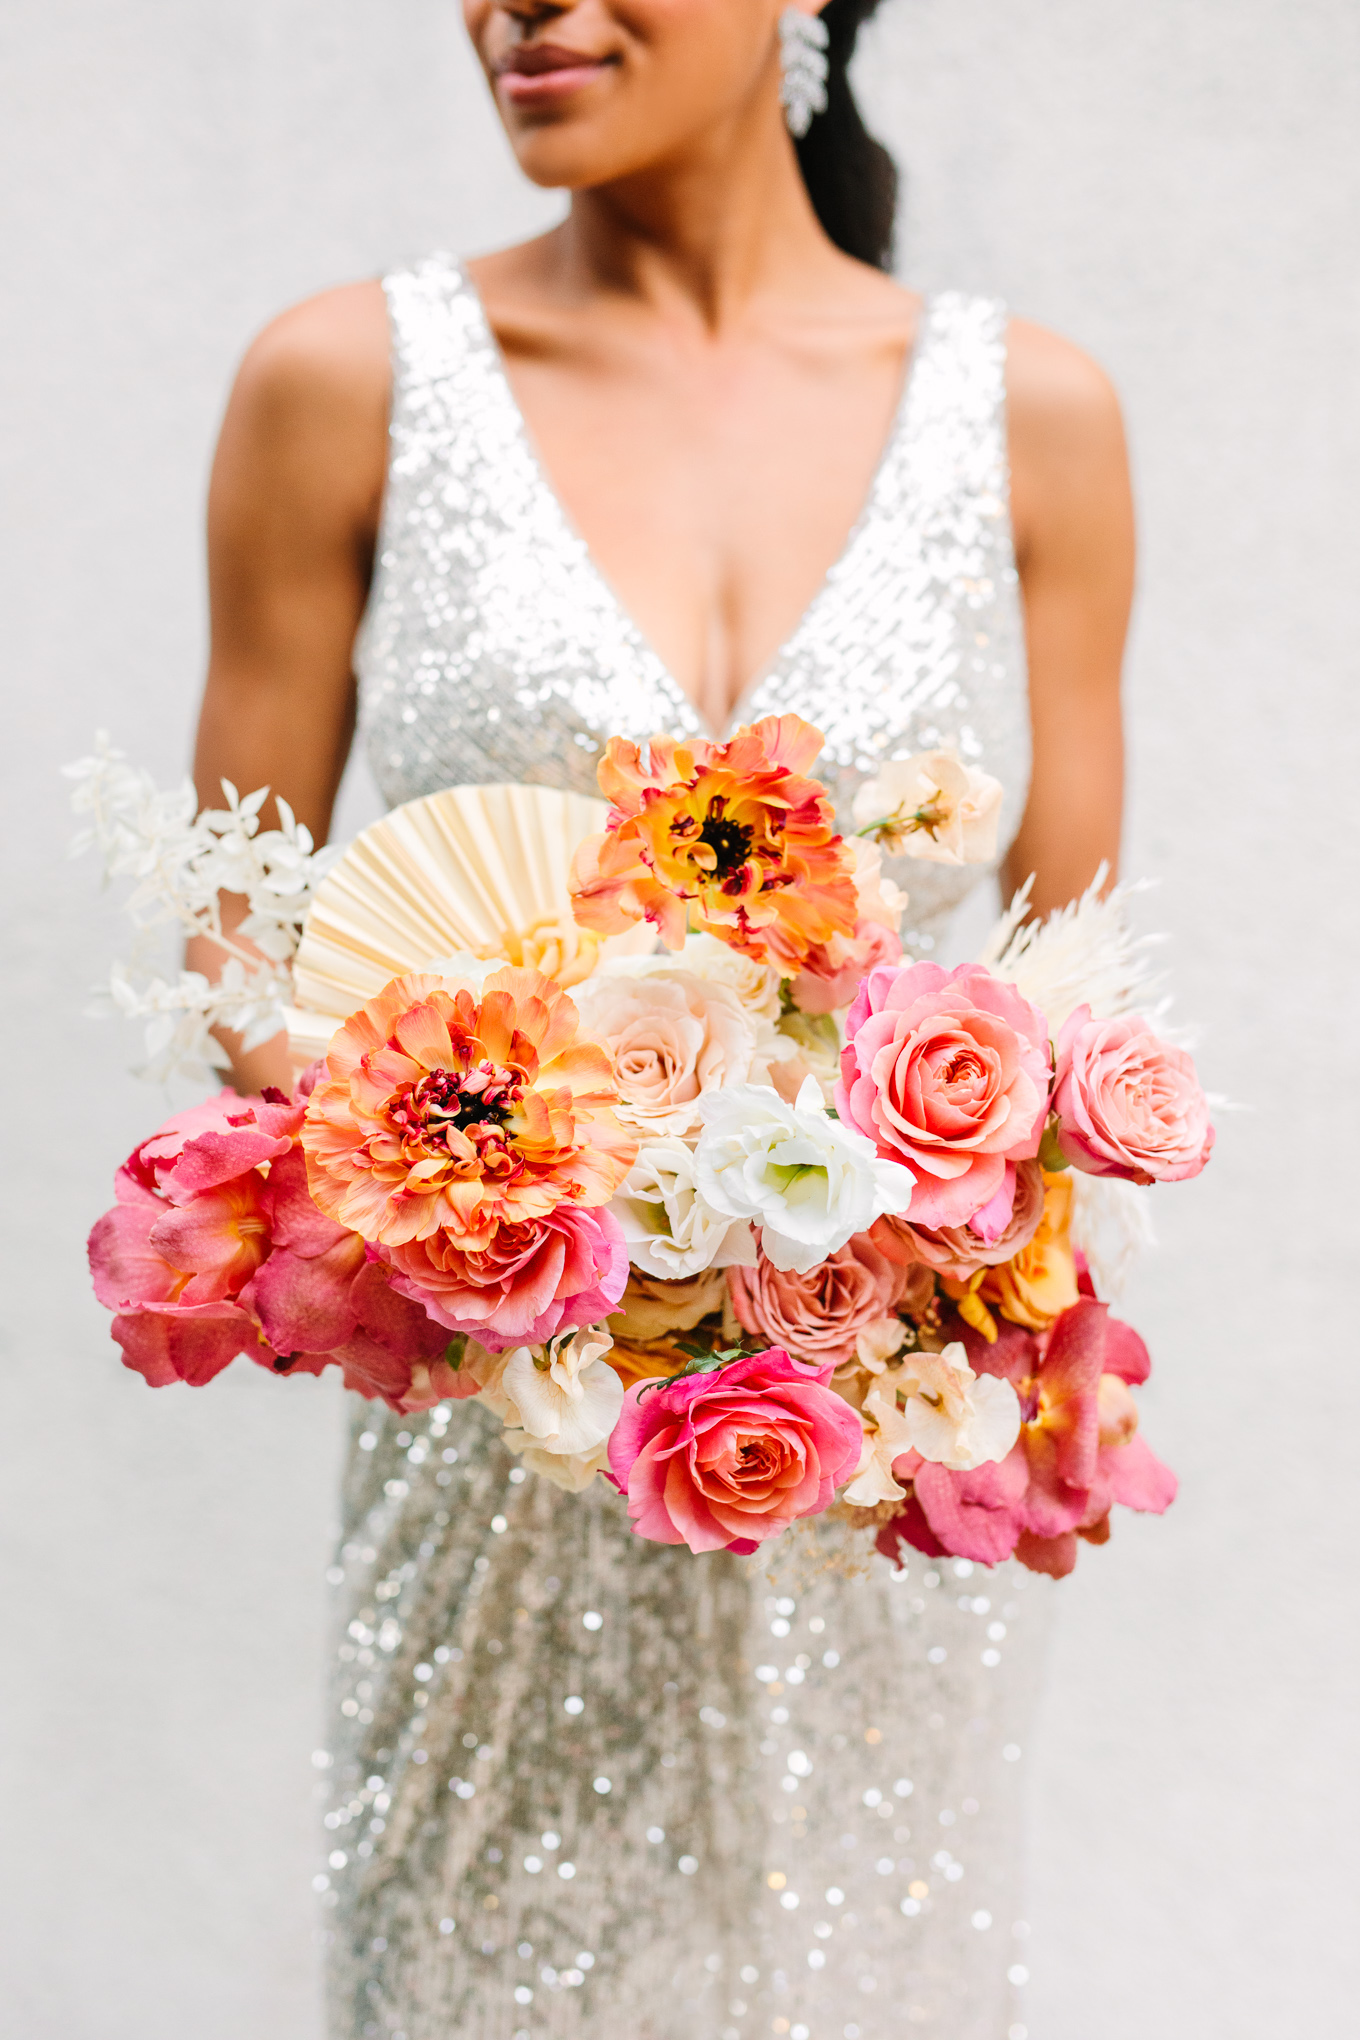 Pink and peach unique wedding flowers | Beautiful bridal bouquet inspiration | Colorful and elevated wedding photography for fun-loving couples in Southern California | #weddingflowers #weddingbouquet #bridebouquet #bouquetideas #uniquebouquet   Source: Mary Costa Photography | Los Angeles 